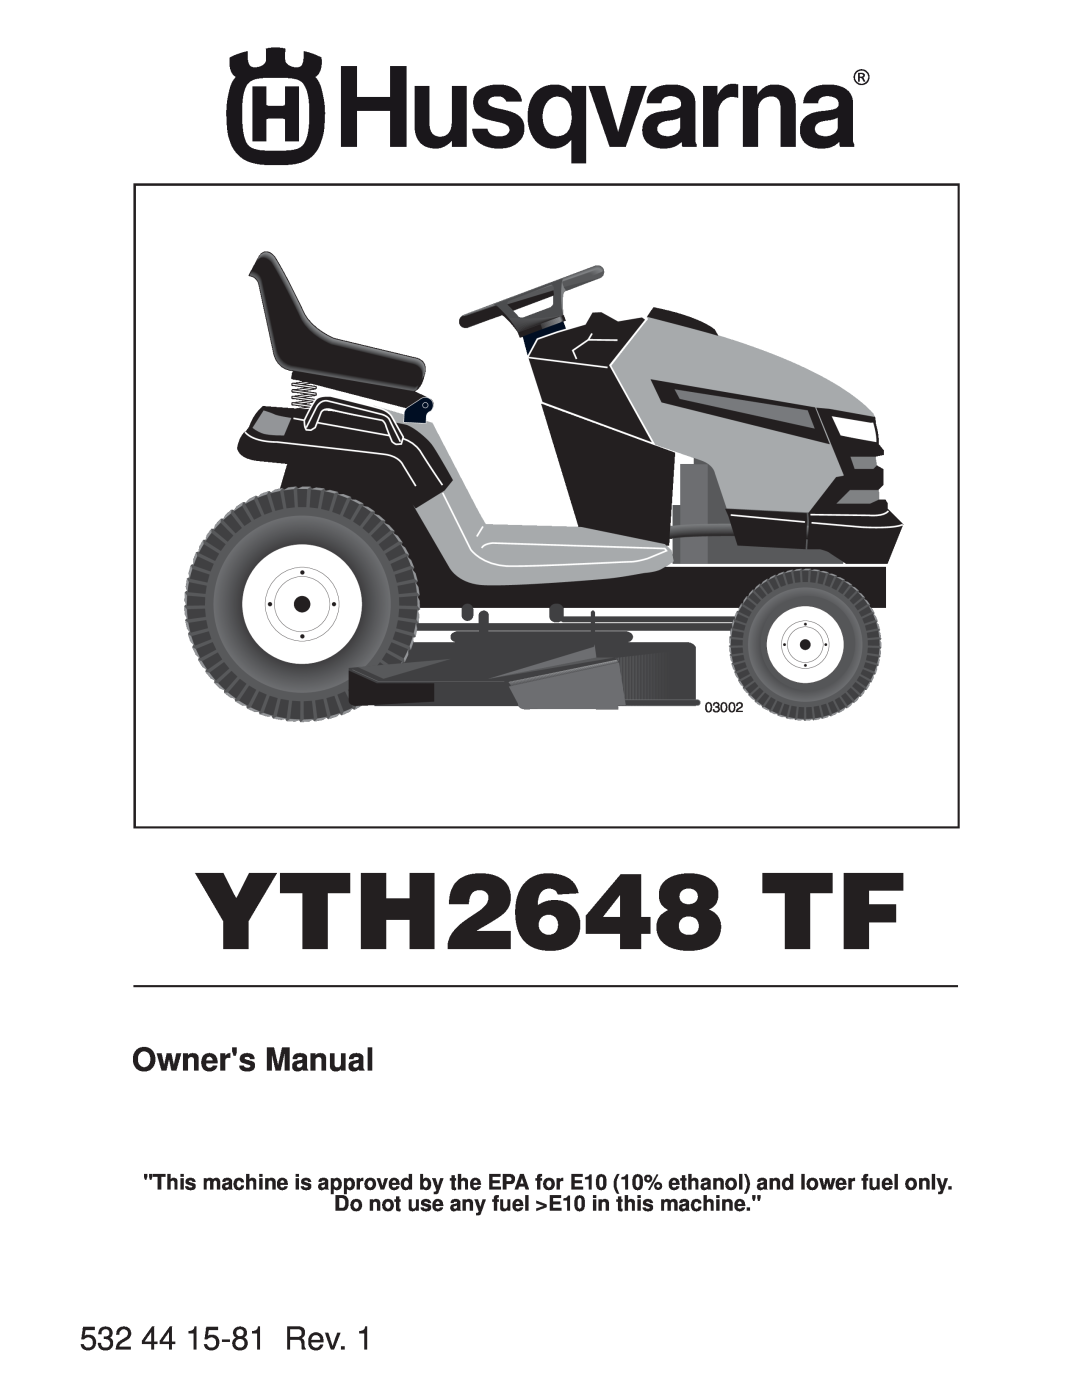 Husqvarna YTH2648 TF owner manual Do not use any fuel E10 in this machine, 532 44 15-81 Rev, 03002 